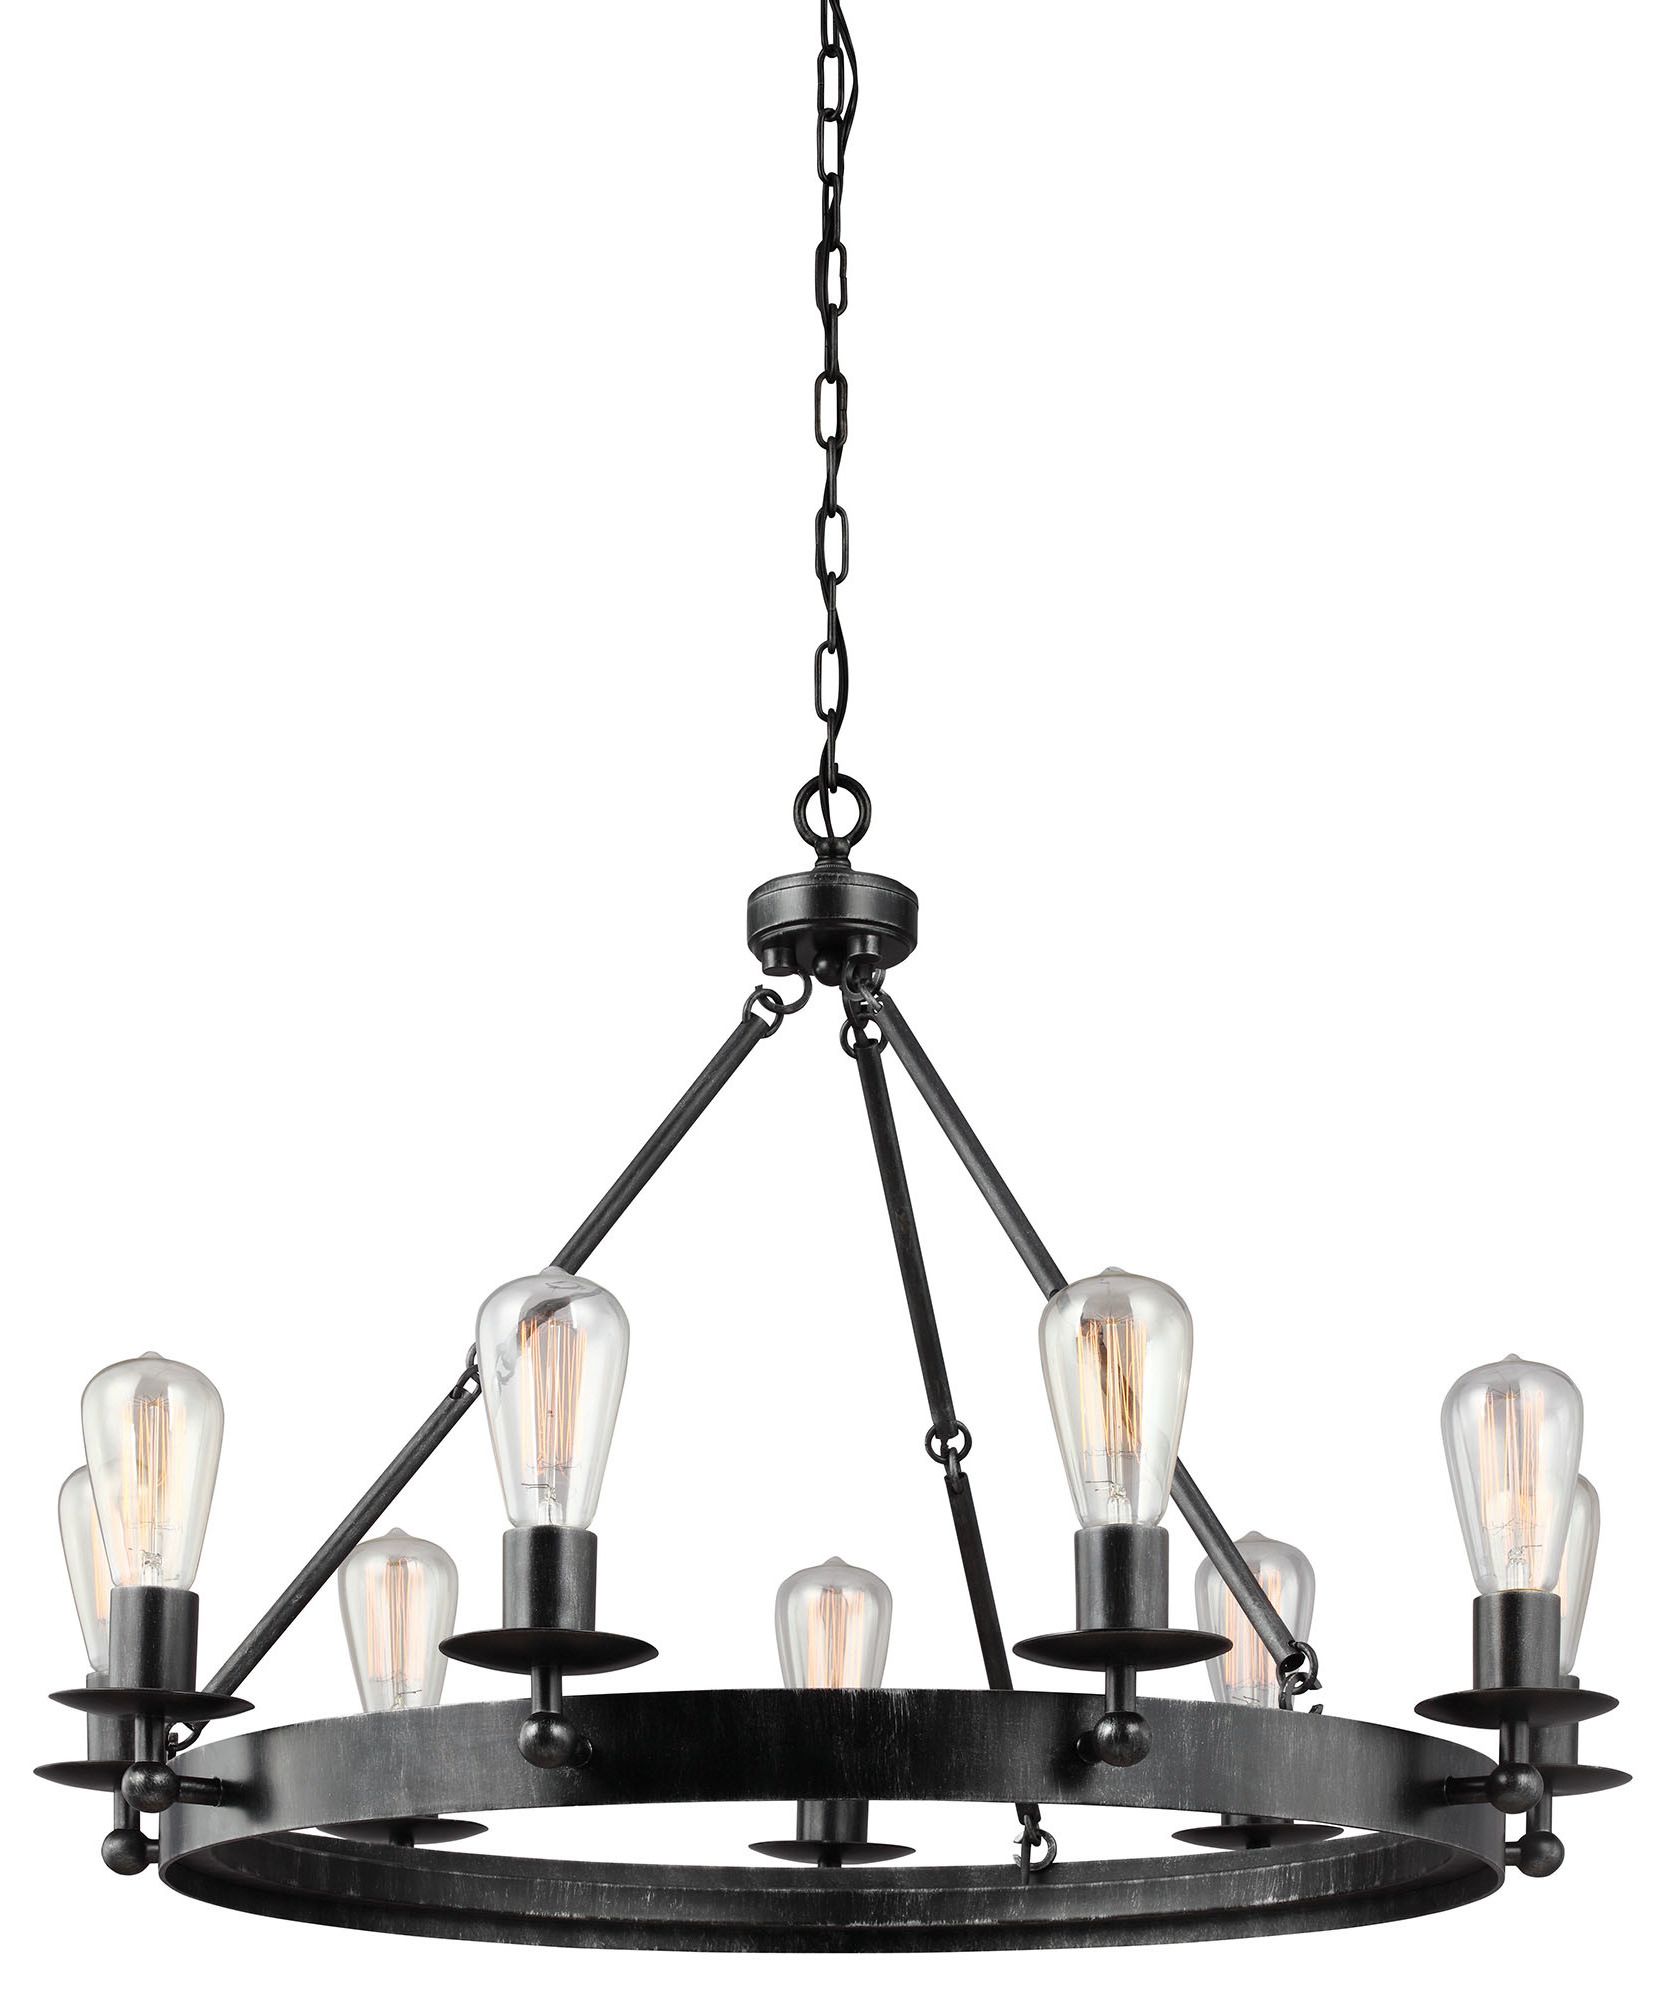 Hines 9 Light Wagon Wheel Chandelier With Regard To Well Known Shayla 12 Light Wagon Wheel Chandeliers (View 17 of 20)